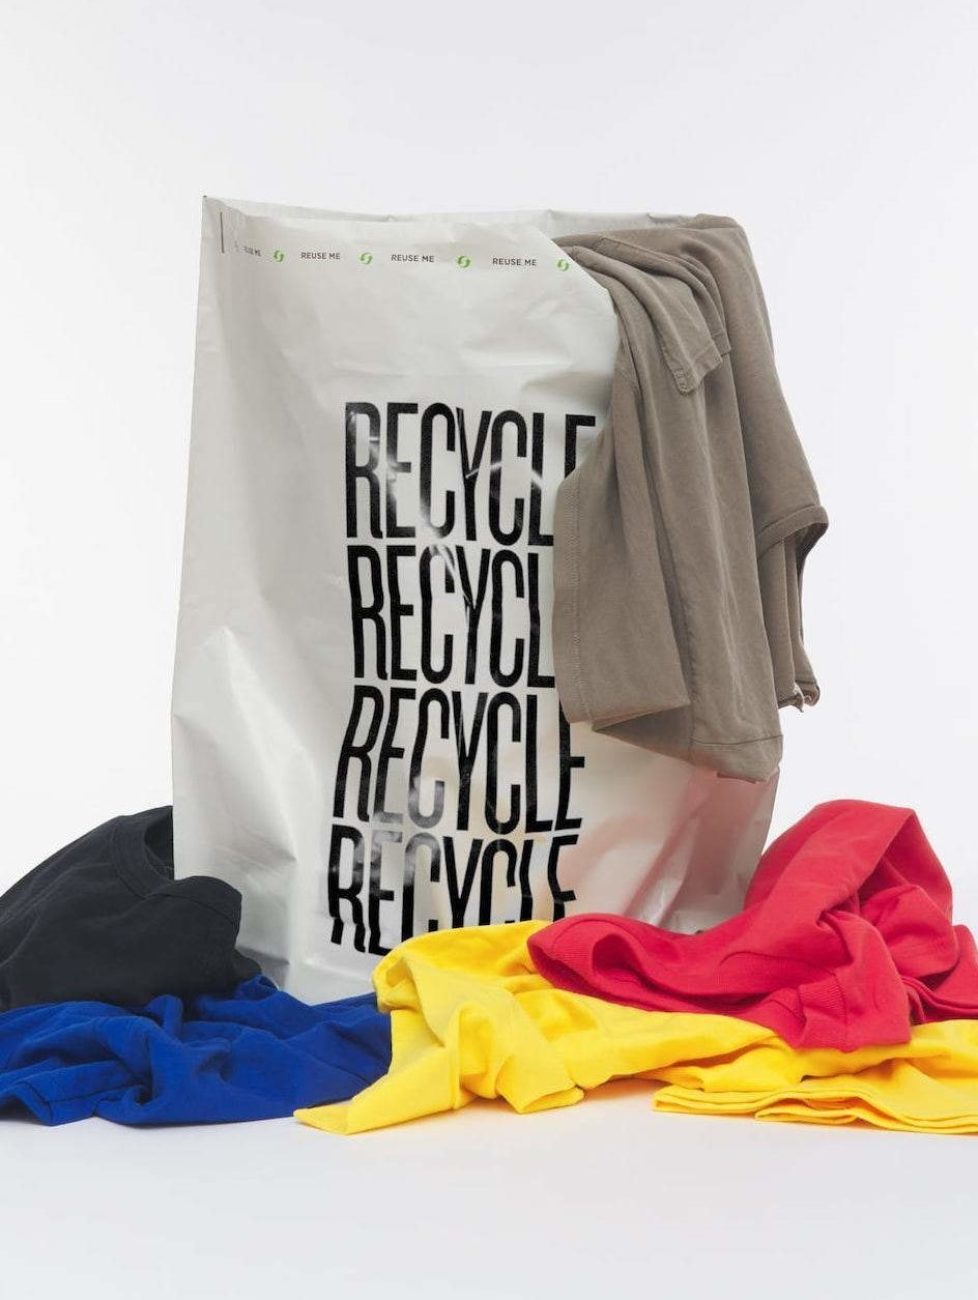  Kristy Caylor, For Days: Keeping clothing out of landfills – Well Made E141